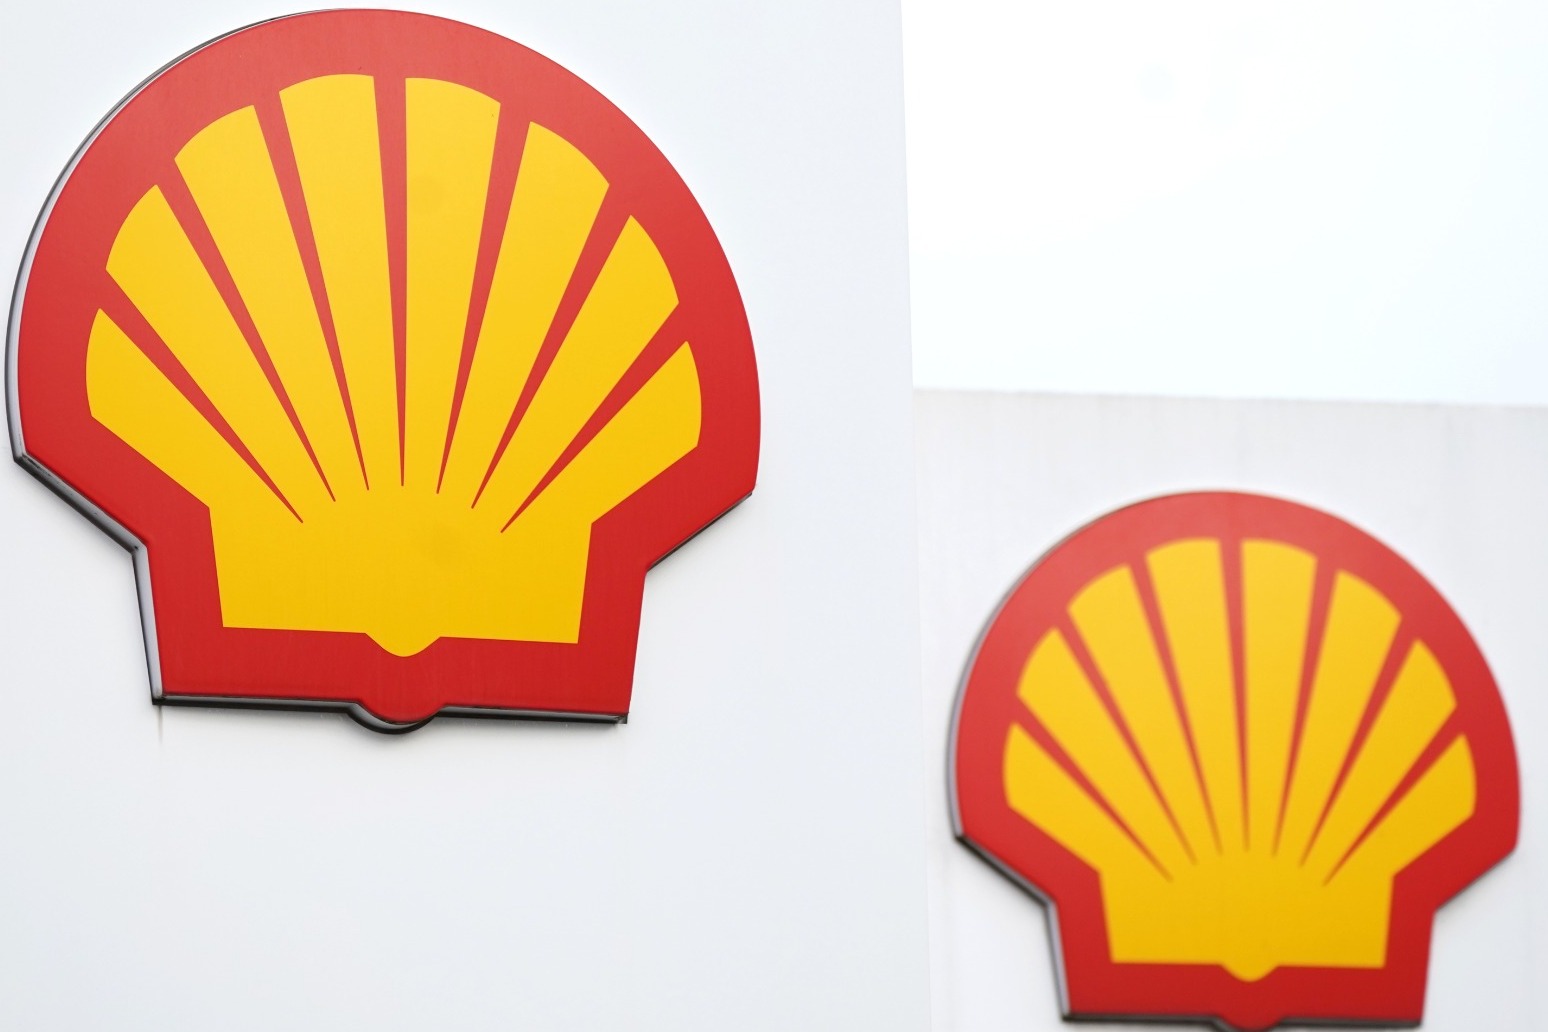 Shell blasted for ‘climate-wrecking’ U-turn on plans to cut oil production 